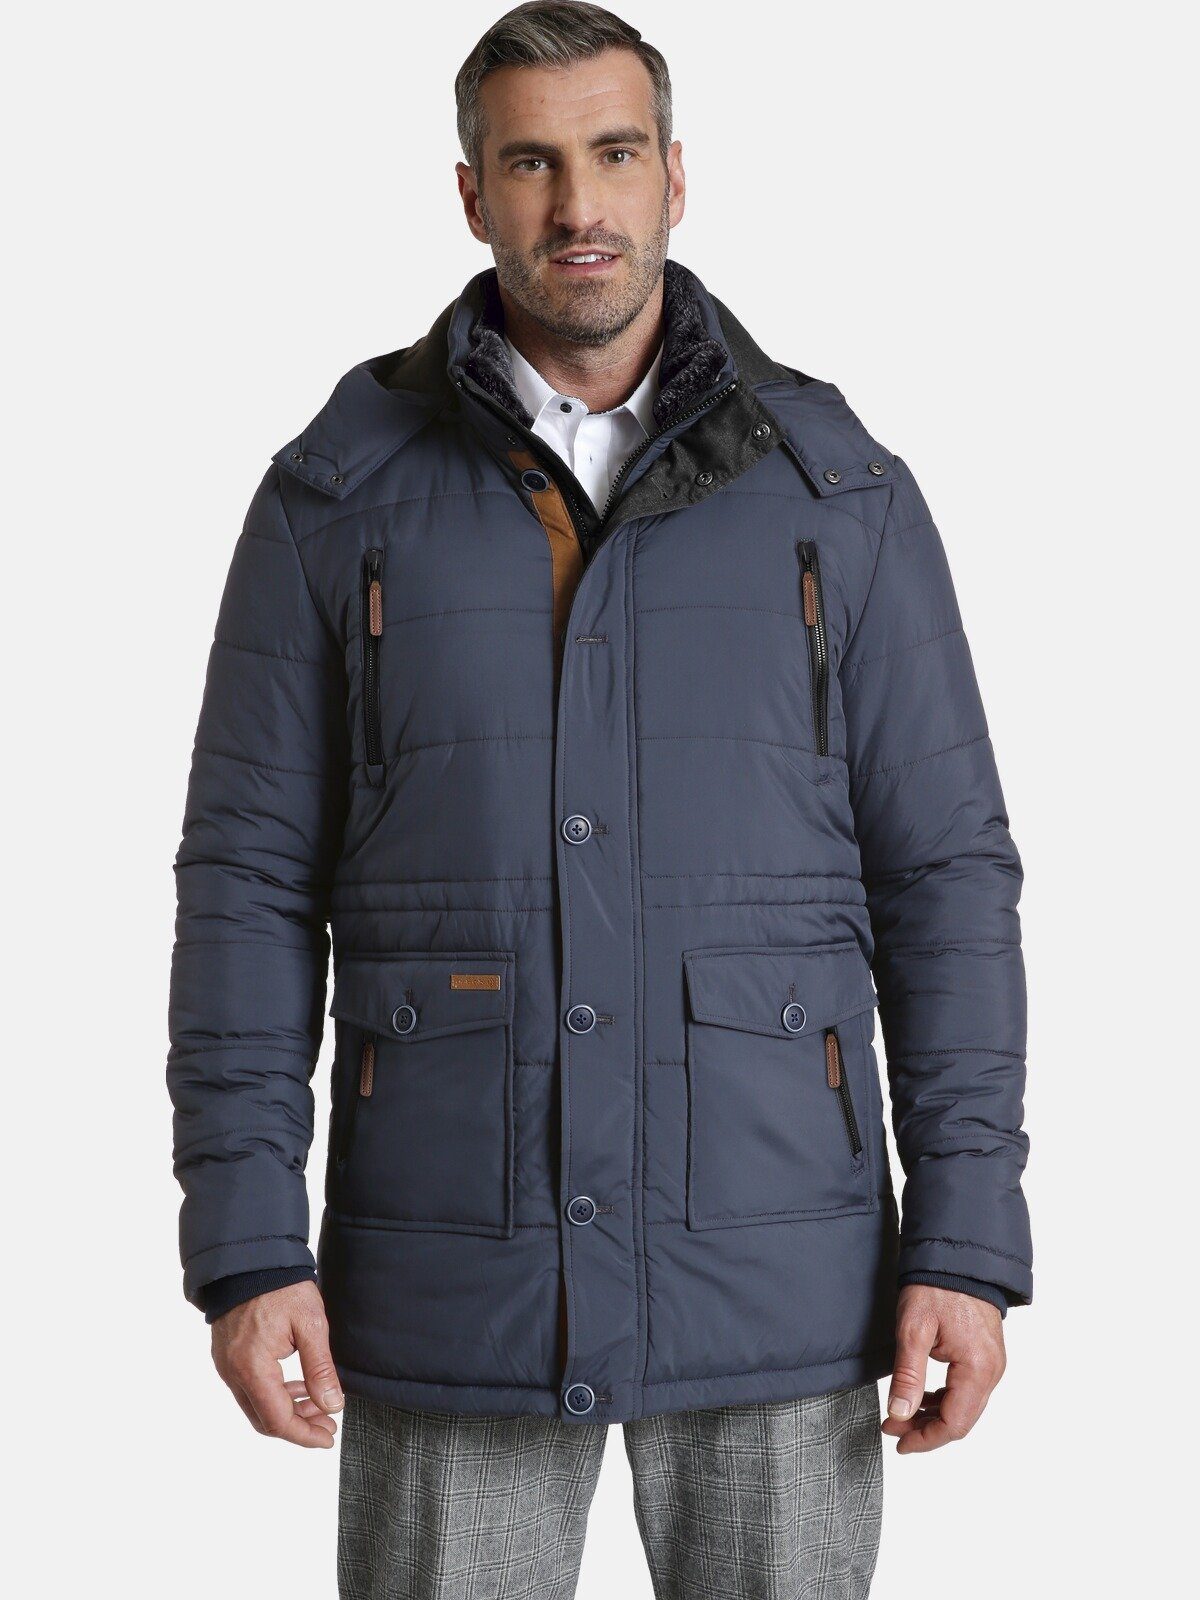 Charles Colby Outdoorjacke SIR HORACE Winterjacke, abnehmbare Kapuze